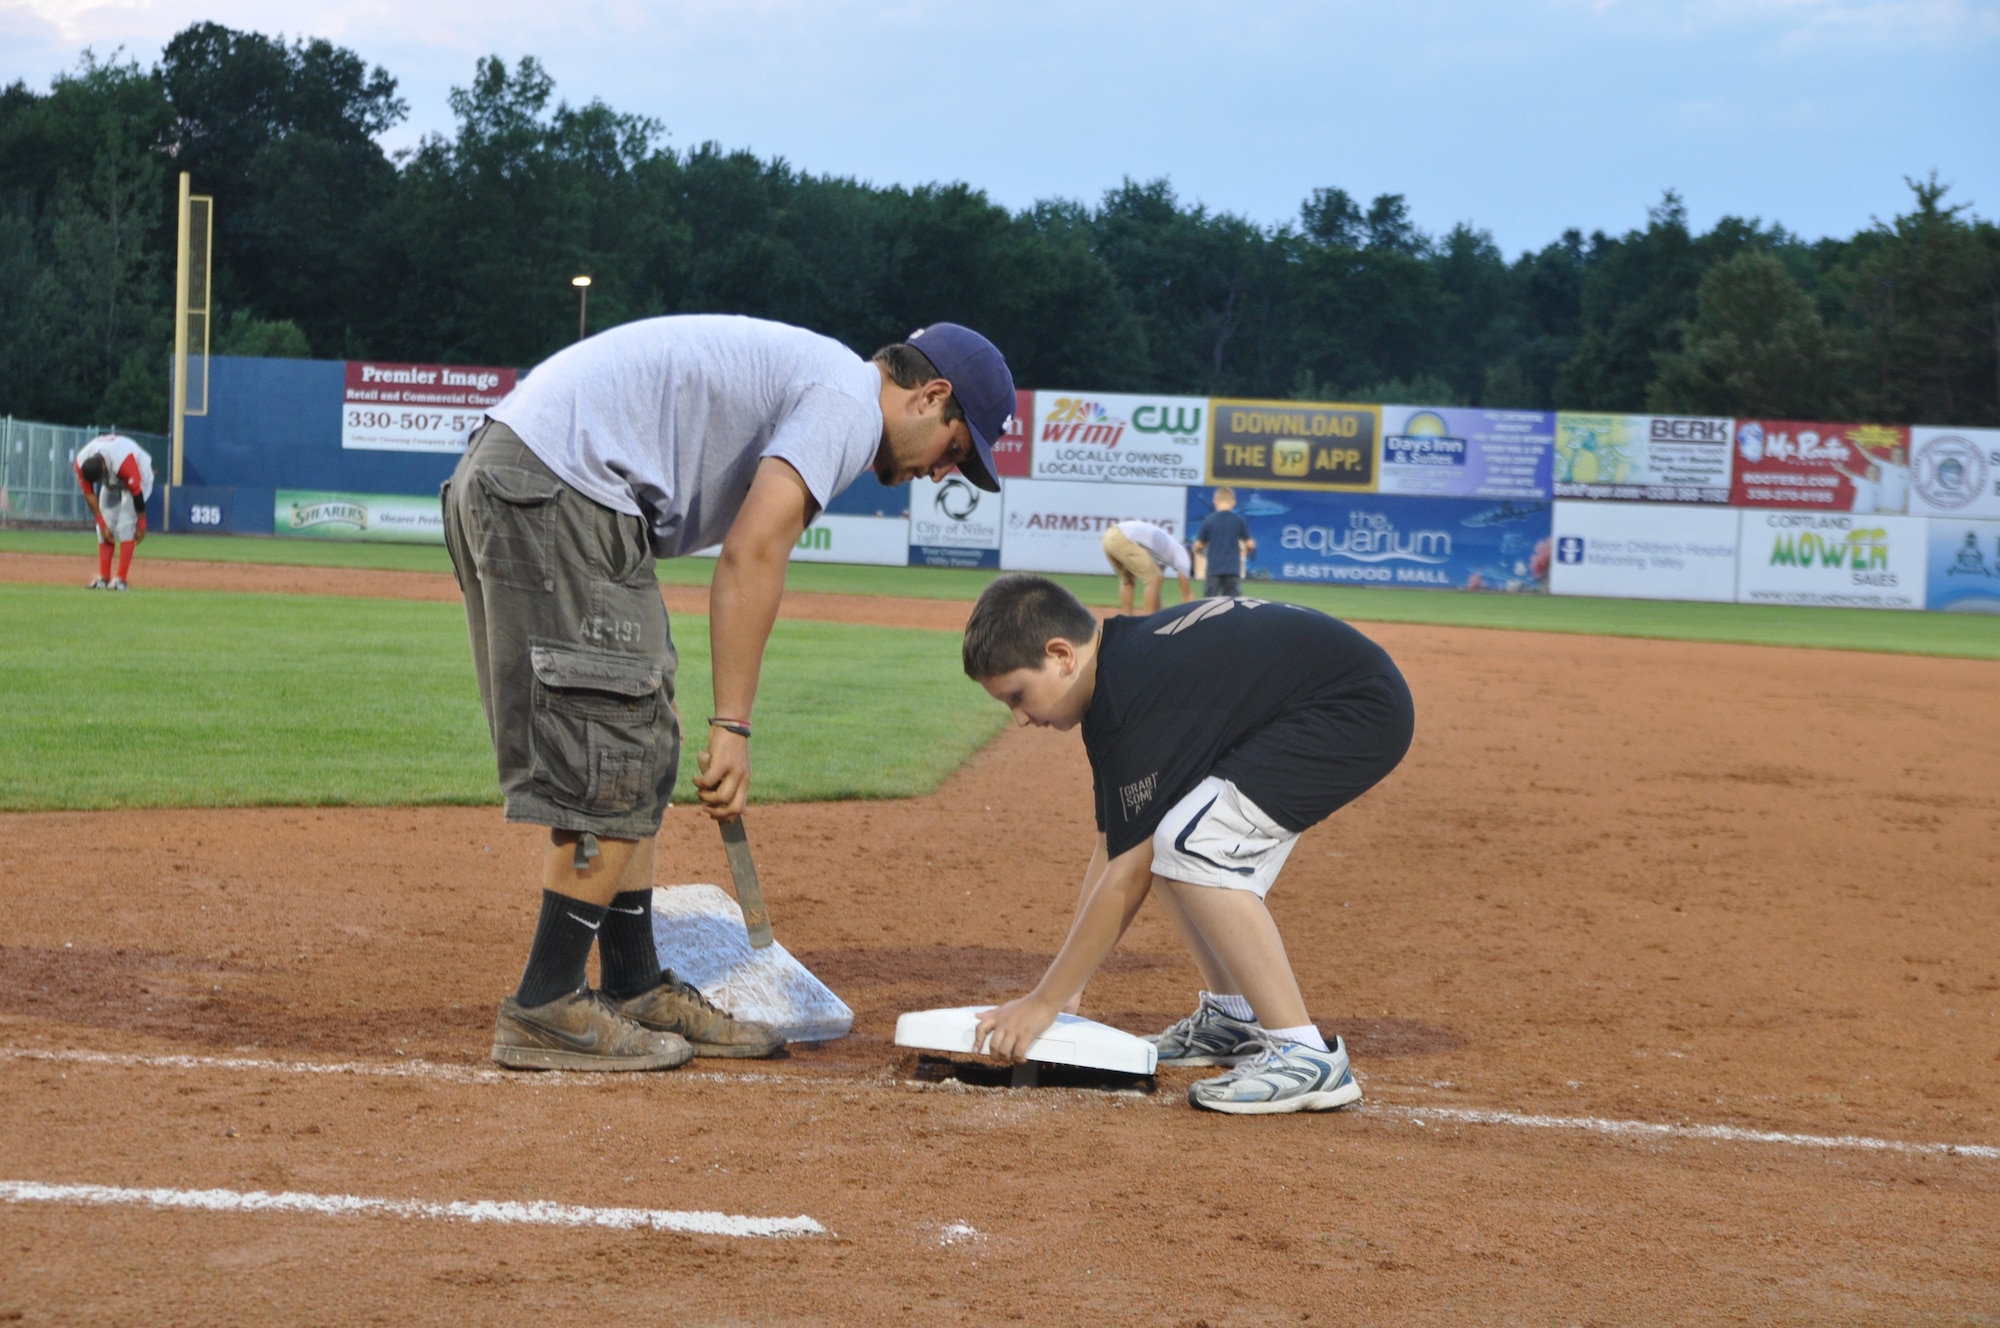 Nick Geraci, a game night Public Affairs event assistant, works to switch out the first base bag during a minor league baseball game between the Cleveland Indians Class A affiliate Mahoning Valley Scrappers and the Lowell Spinners at Eastwood Field here, August 7, 2013. Nearly 200 Citizen Airmen along with their families, friends and co-workers were in attendance and representatives from the 910th Airlift Wing, based at nearby Youngstown Air Reserve Station, Ohio, were involved in many game night activities. U.S. Air Force photo by Master Sgt. Bob Barko Jr.